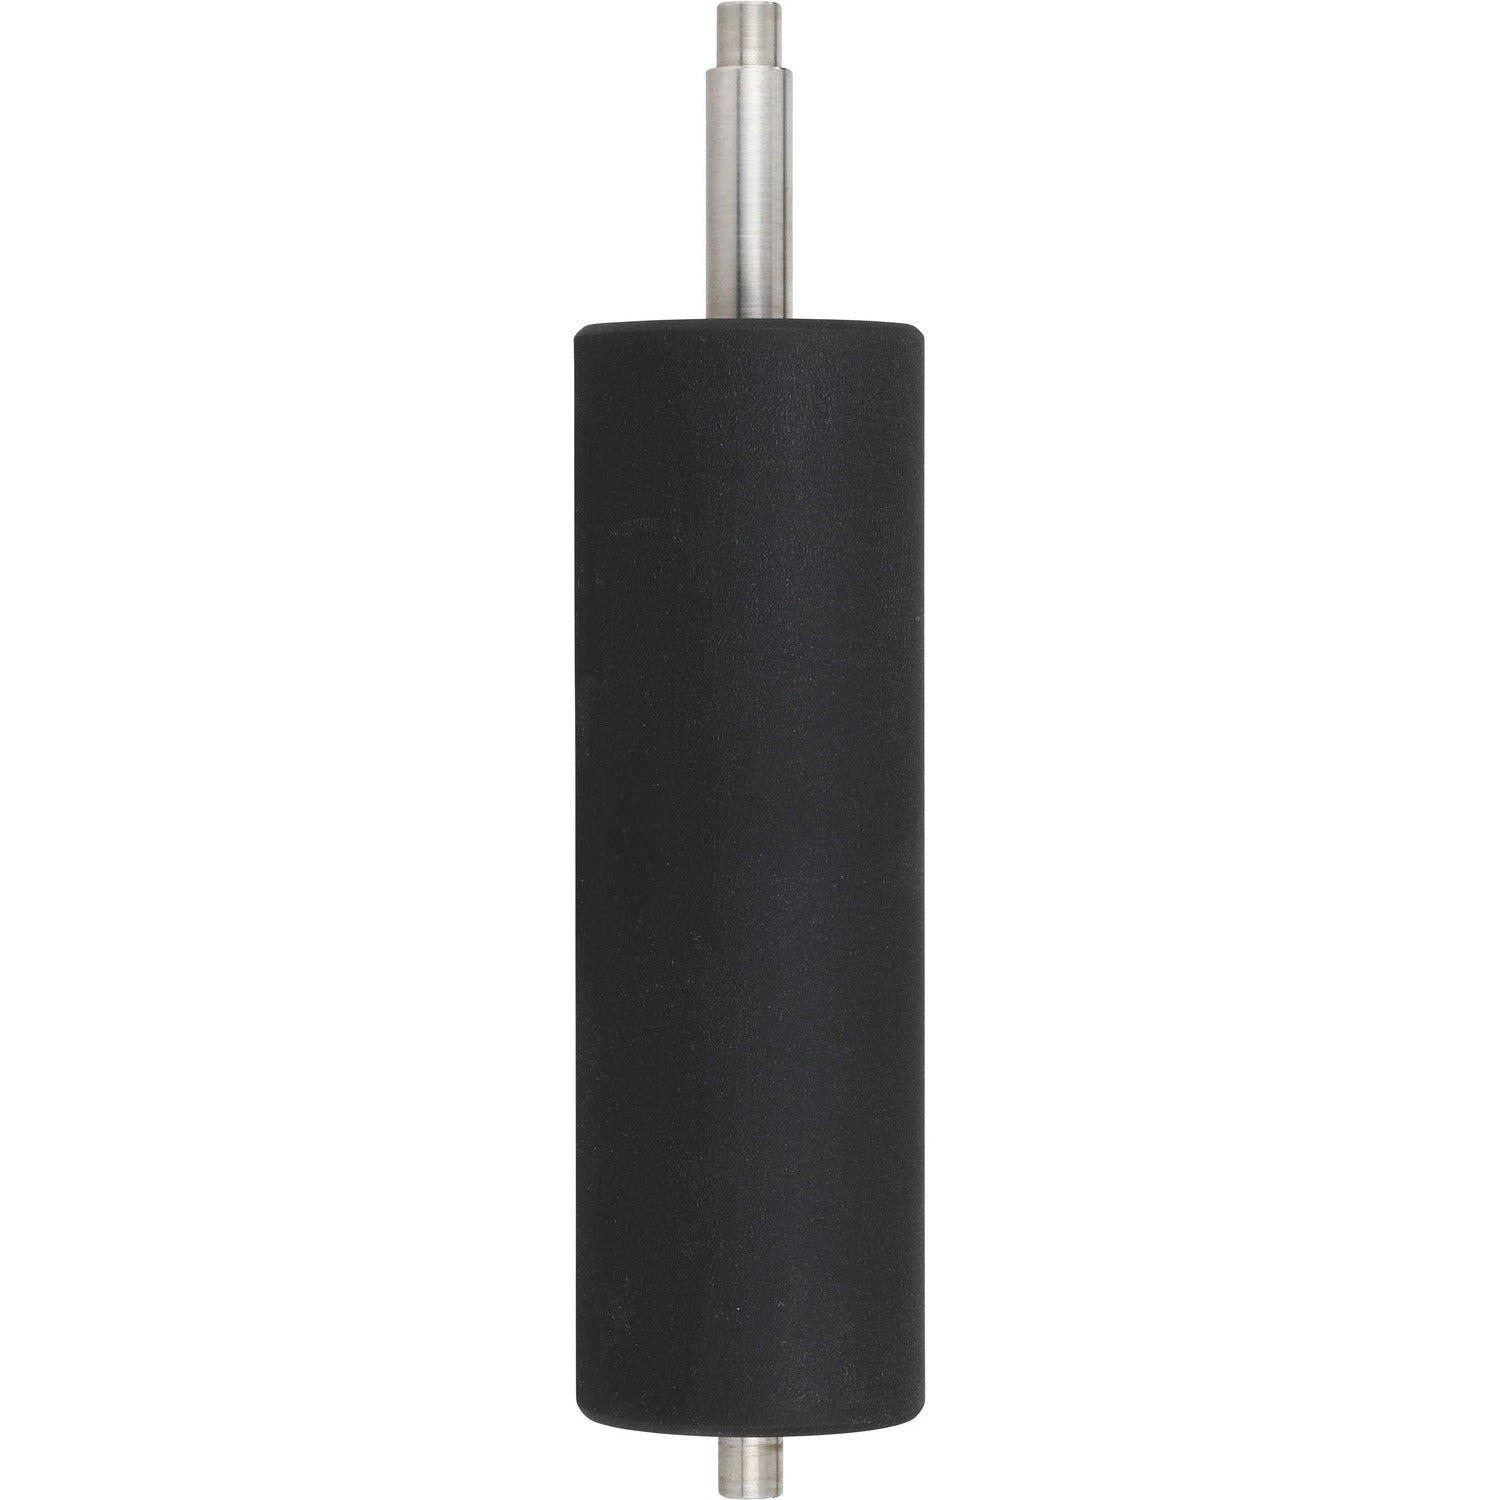 Black cylindrical rubber roller with stainless steel axle extending outward. Part shown on white background. 